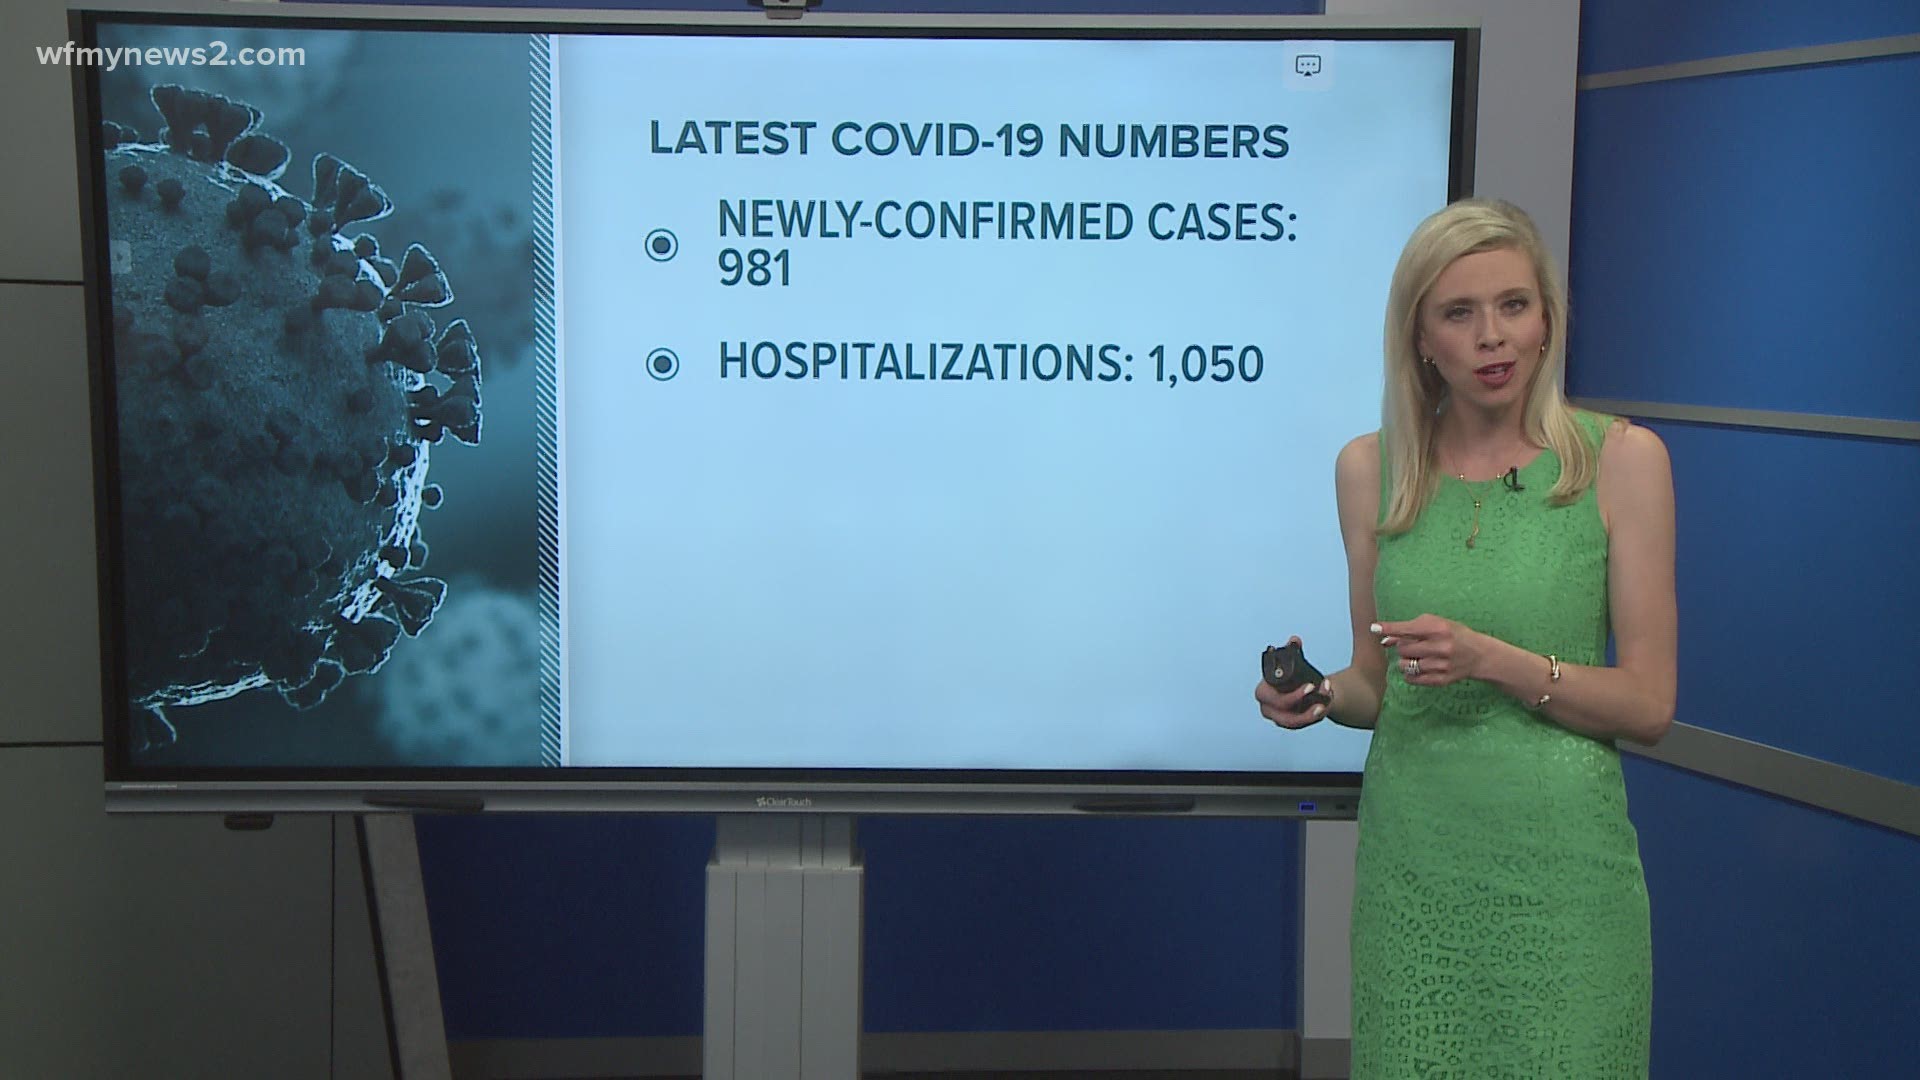 The weekly recovery report showed more than 96% of COVID cases are ‘presumed recovered,’ yet patients are continuously hospitalized with the virus.